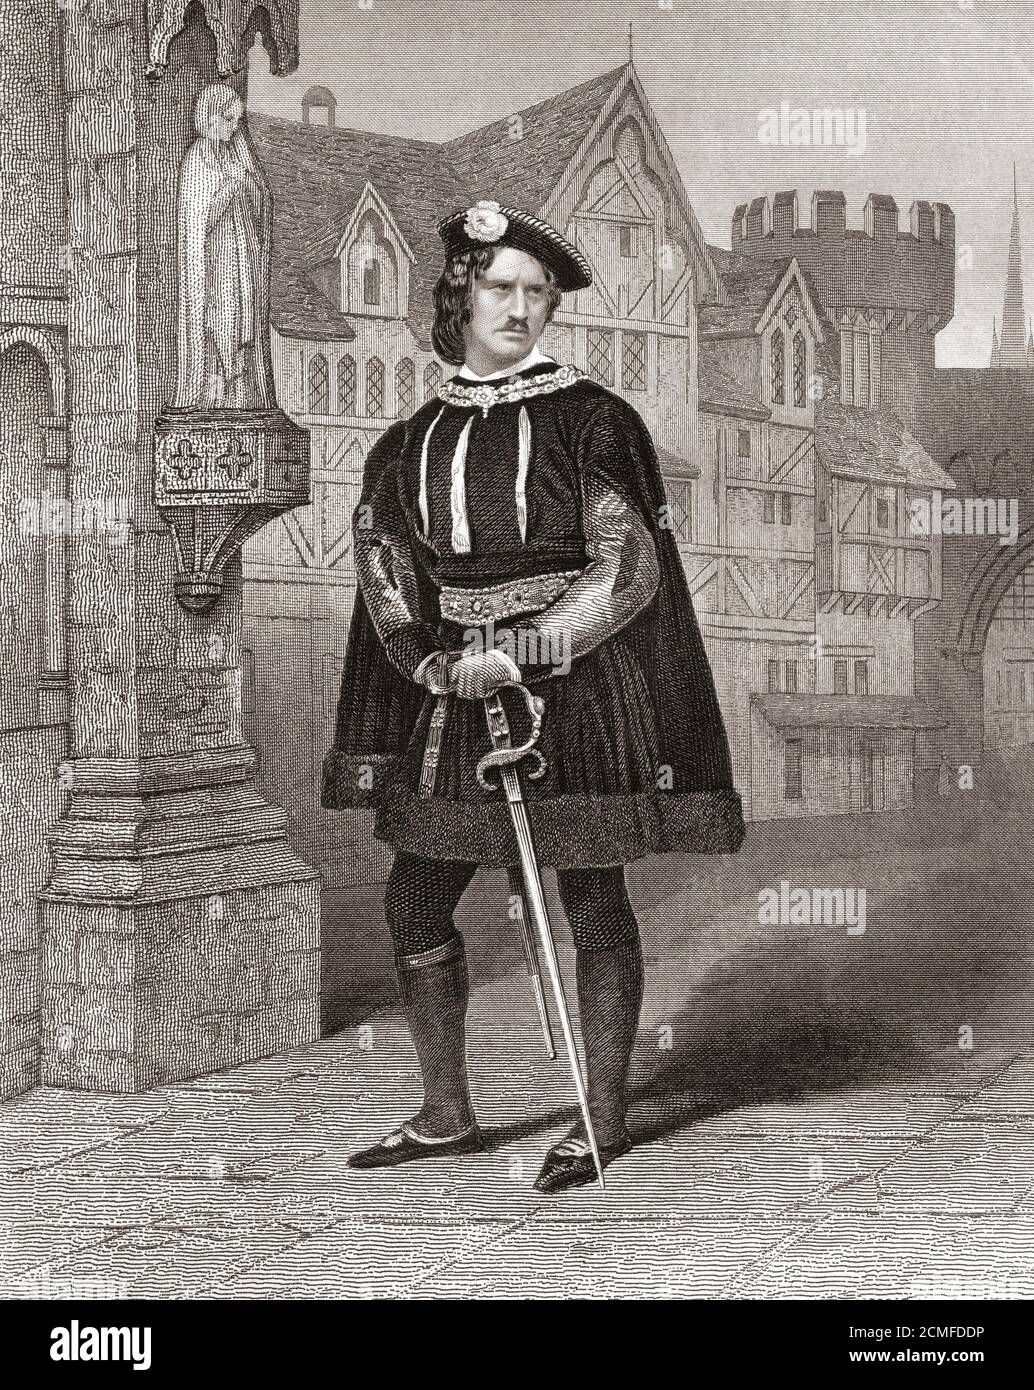 Mr. J.W. Wallack in the role of Gloster (Richard, Duke of Gloucester) from the Shakespeare play Richard III.  James William Wallack, c. 1794–1864.  Anglo-American actor and manager. Stock Photo